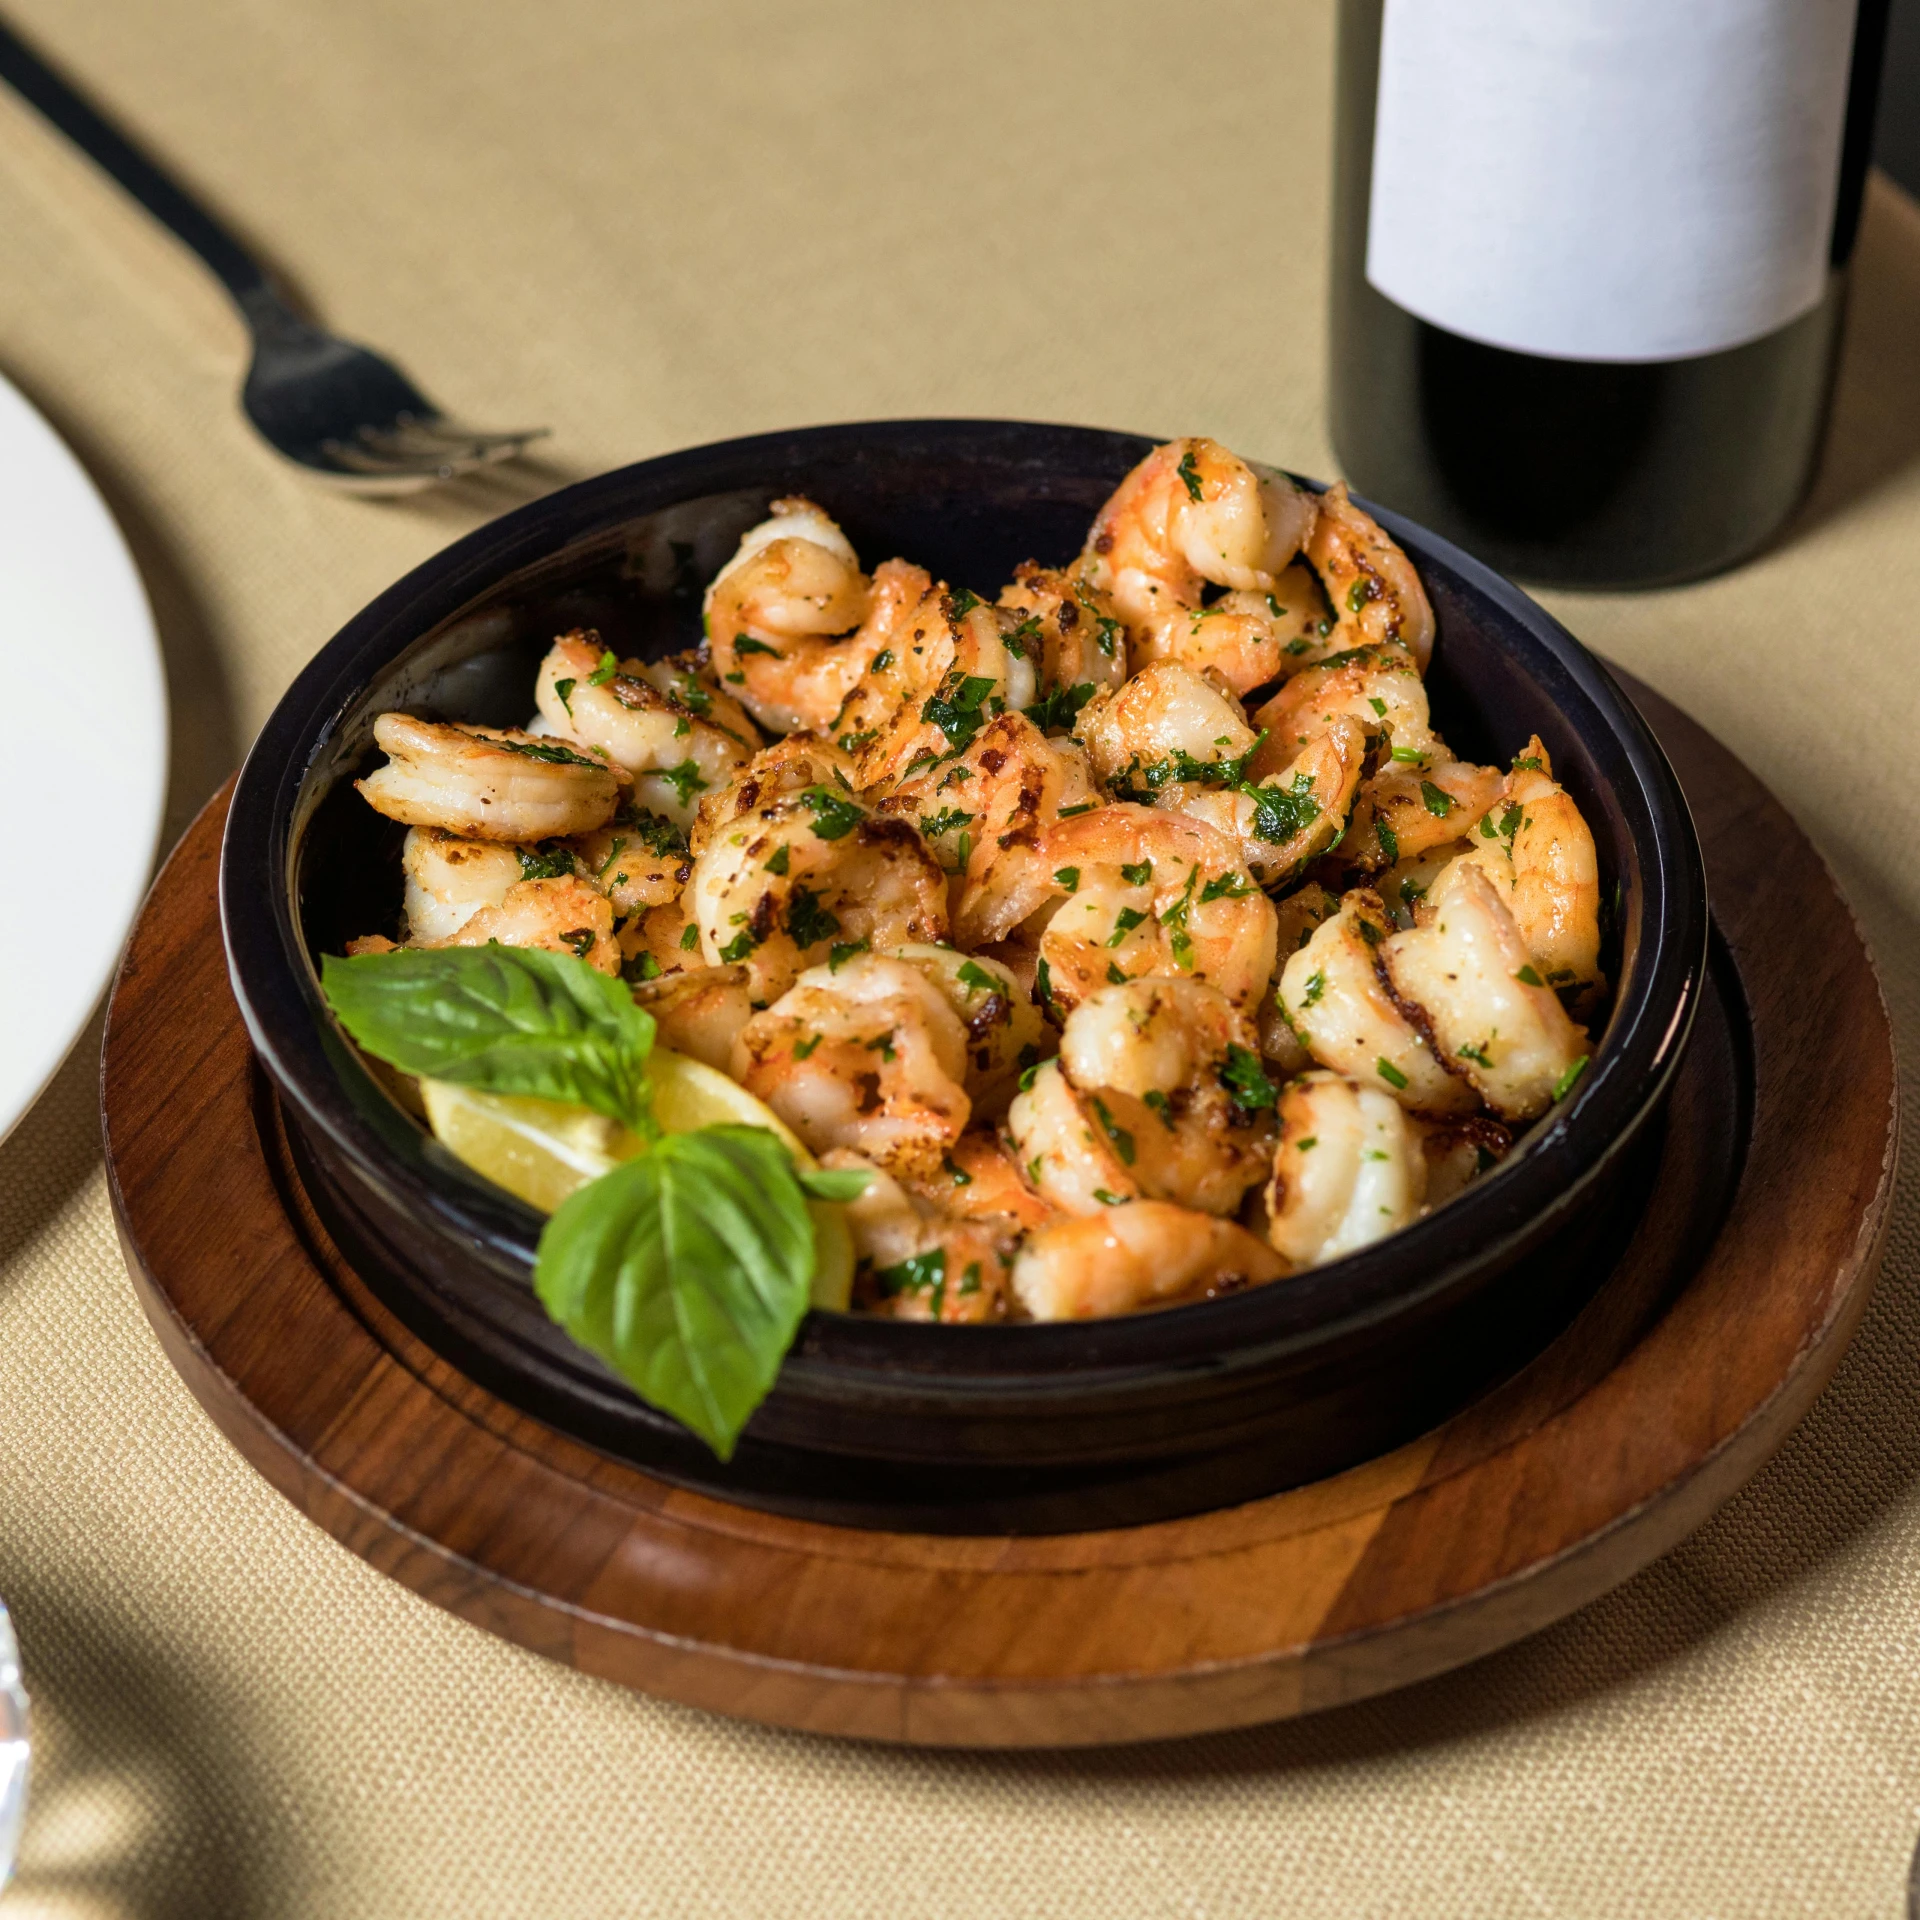 a close up of a plate of food near a bottle of wine, shrimp, tiziano vecelli, full-body, herbs